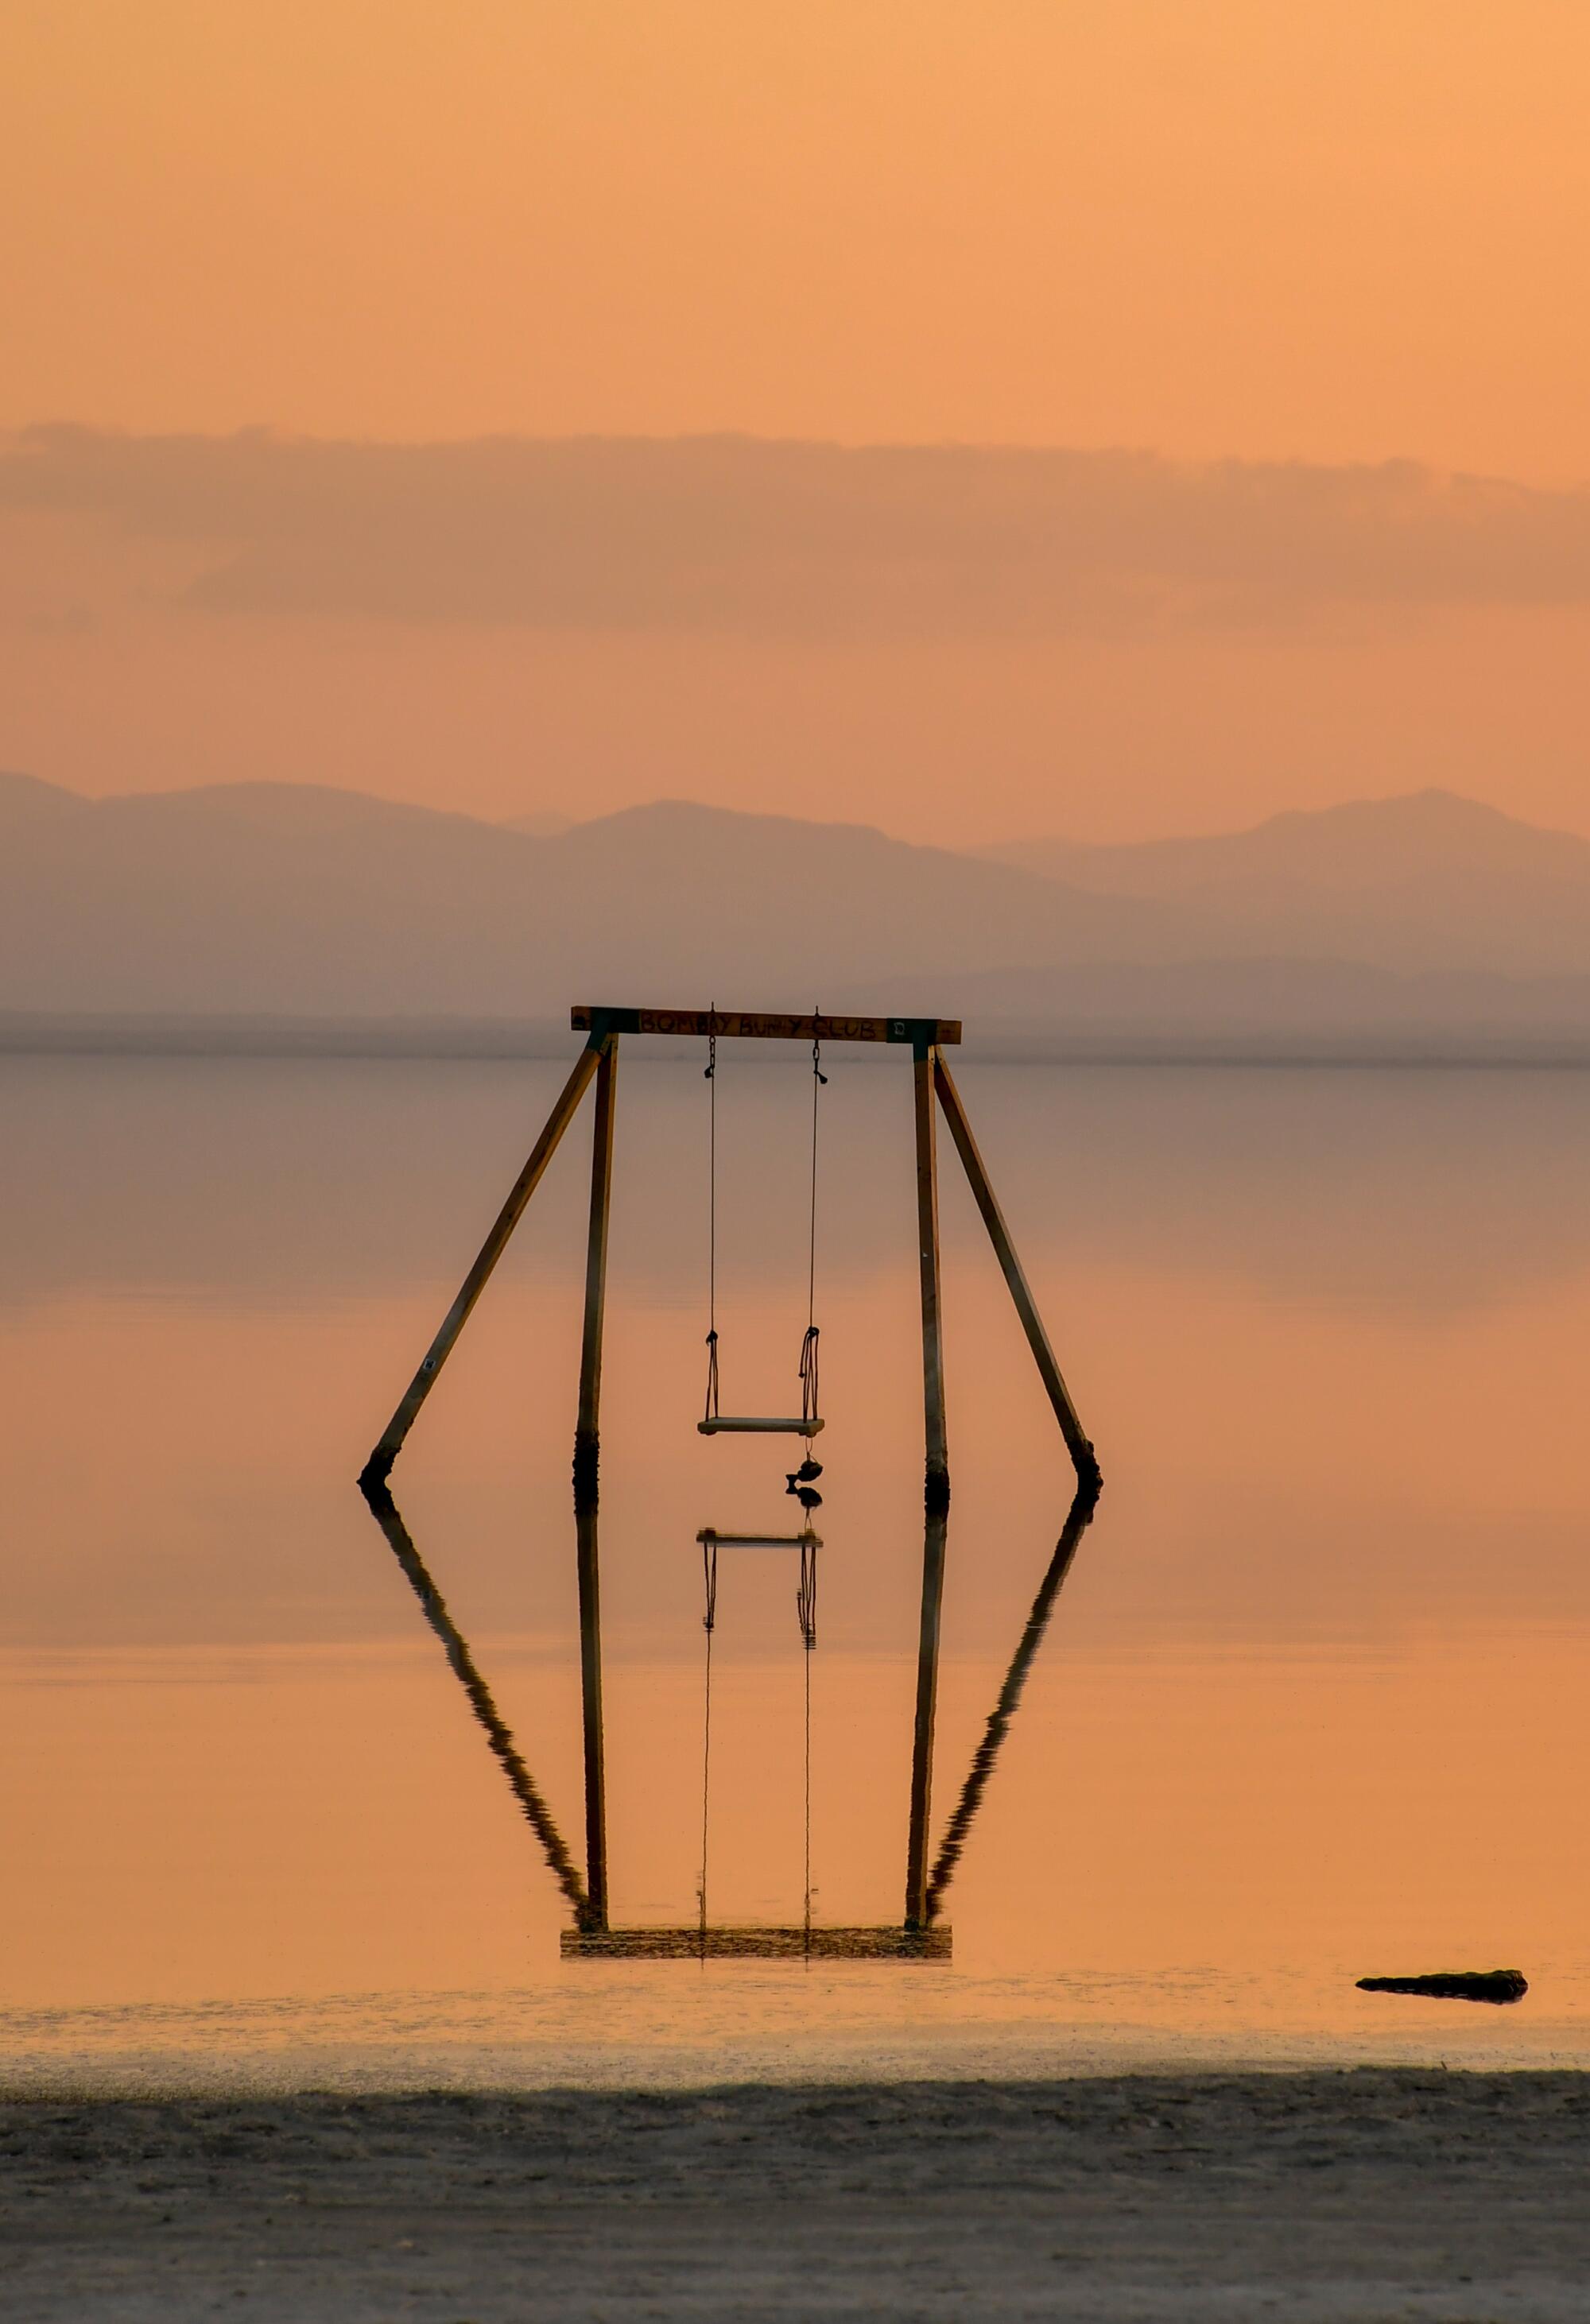 A swing in the middle of the Salton Sea.